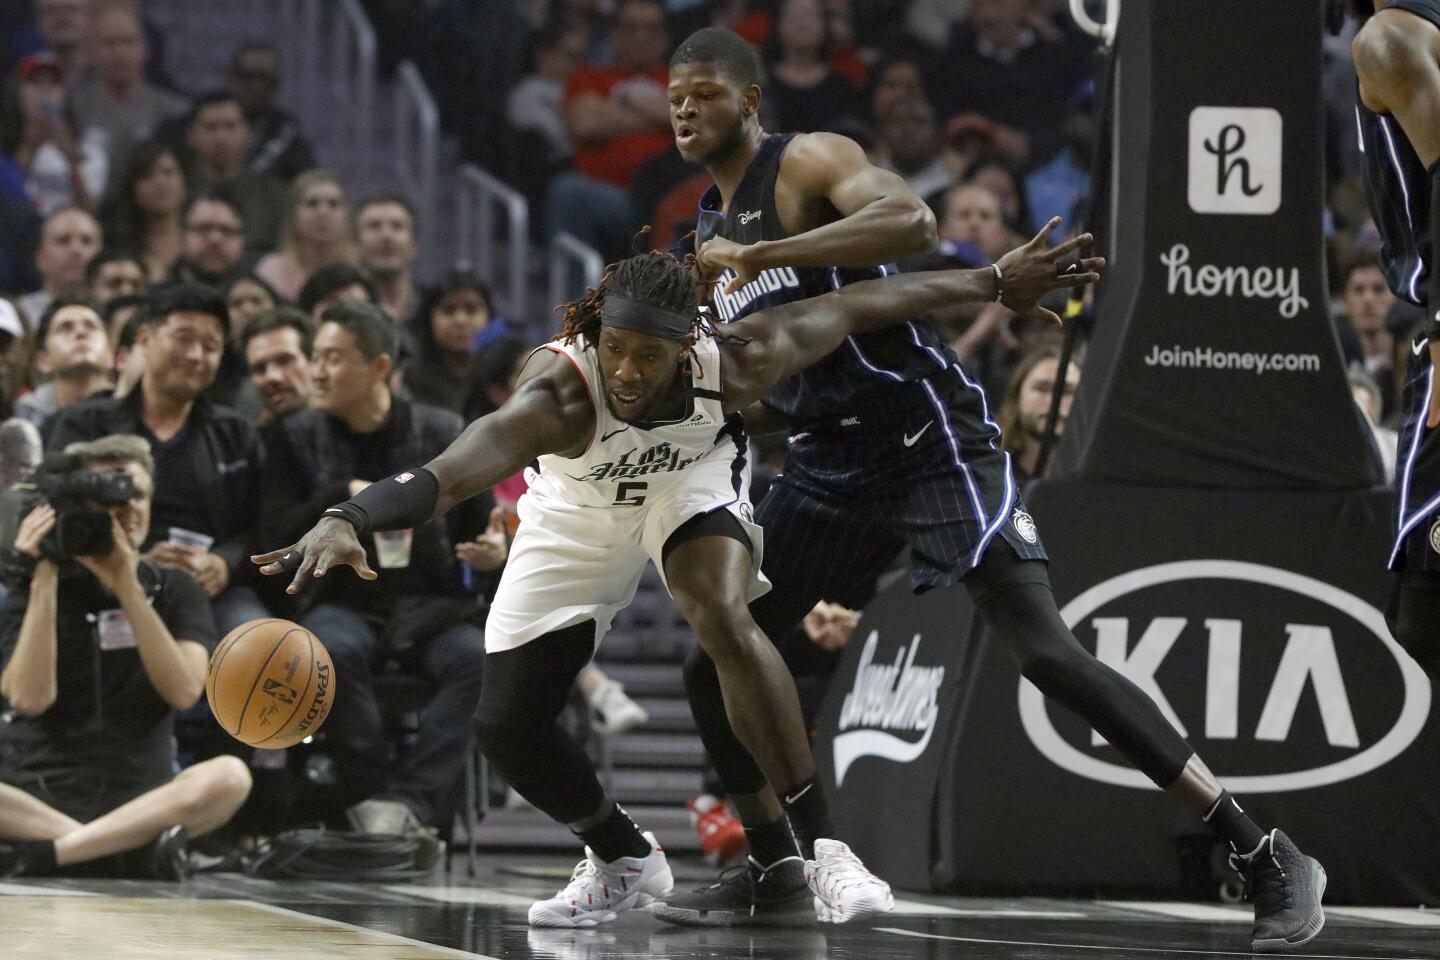 Clippers forward Montrezl Harrell chases a loose ball in front of Magic center Mo Bamba during the first half of a game Jan. 16 at Staples Center.